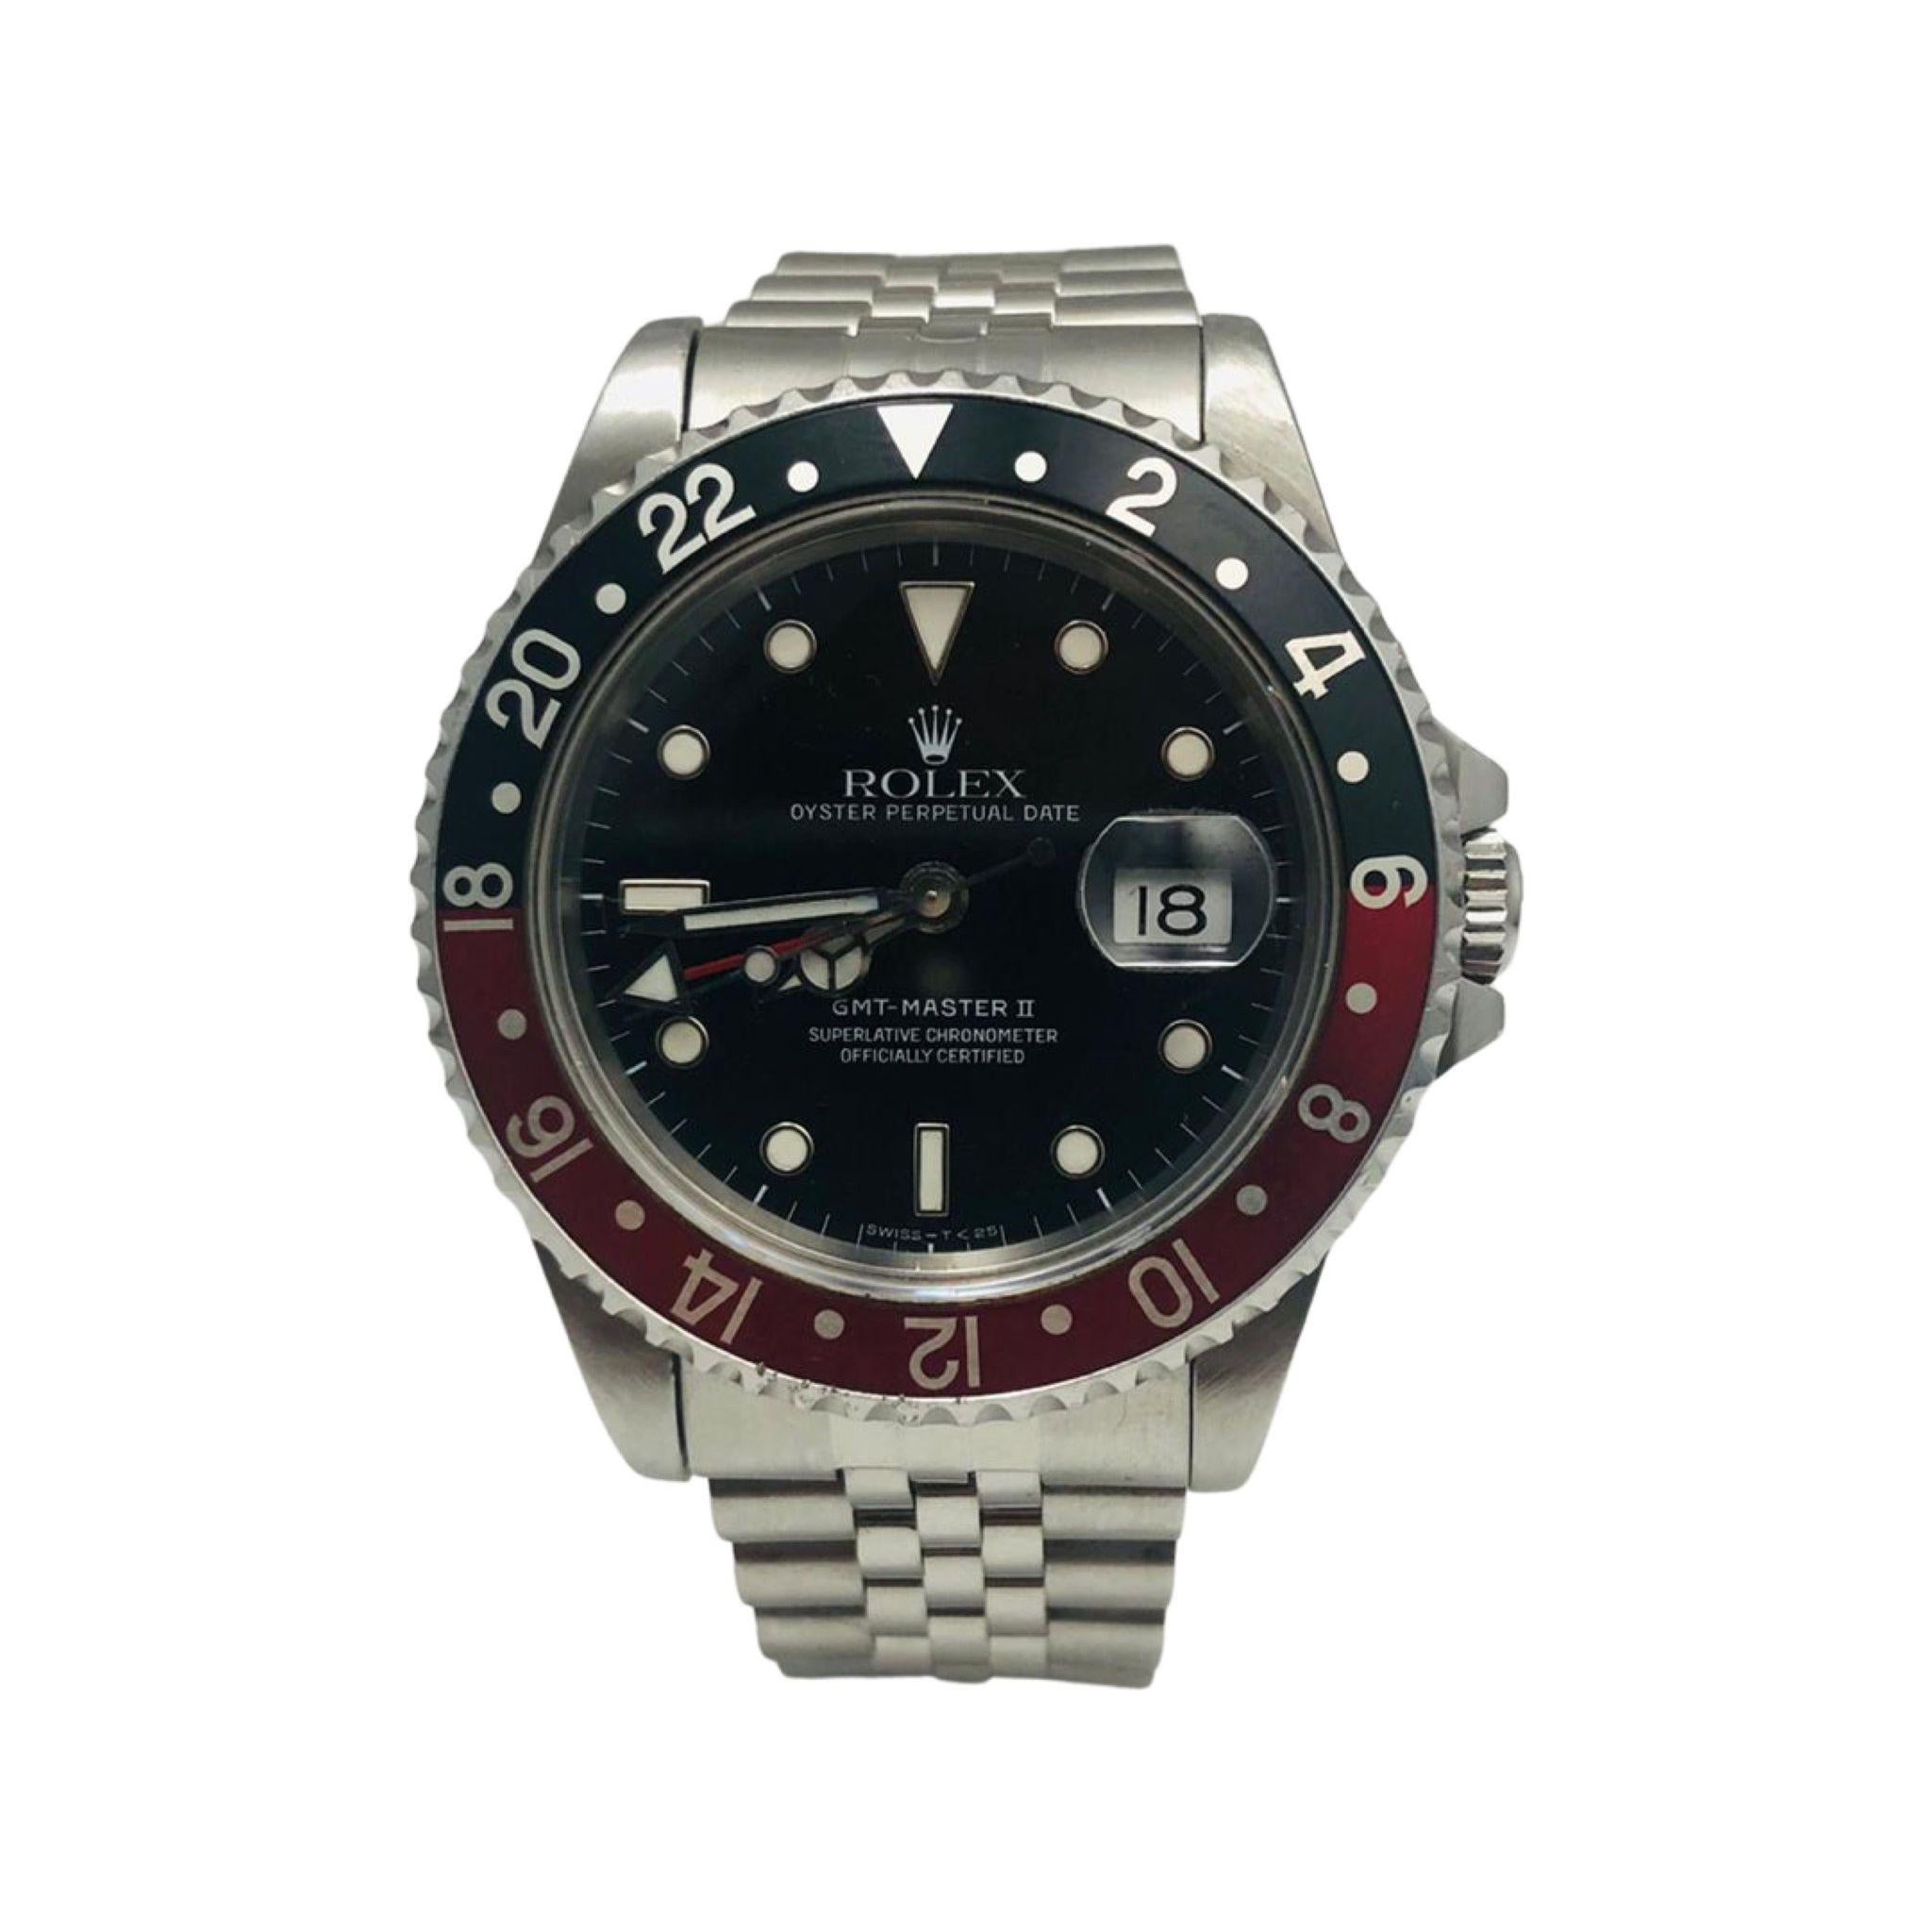 Description

Brand:  Rolex

Model Name: GMT Master II “Coke”

Model Number: 16710

Movement: Automatic

Case Size: 40 mm

Case Back:  Solid

Case Material: Stainless Steel

Bezel:  Black & Red

Dial:  Black

Bracelet: Stainless Steel

Hour Markers: